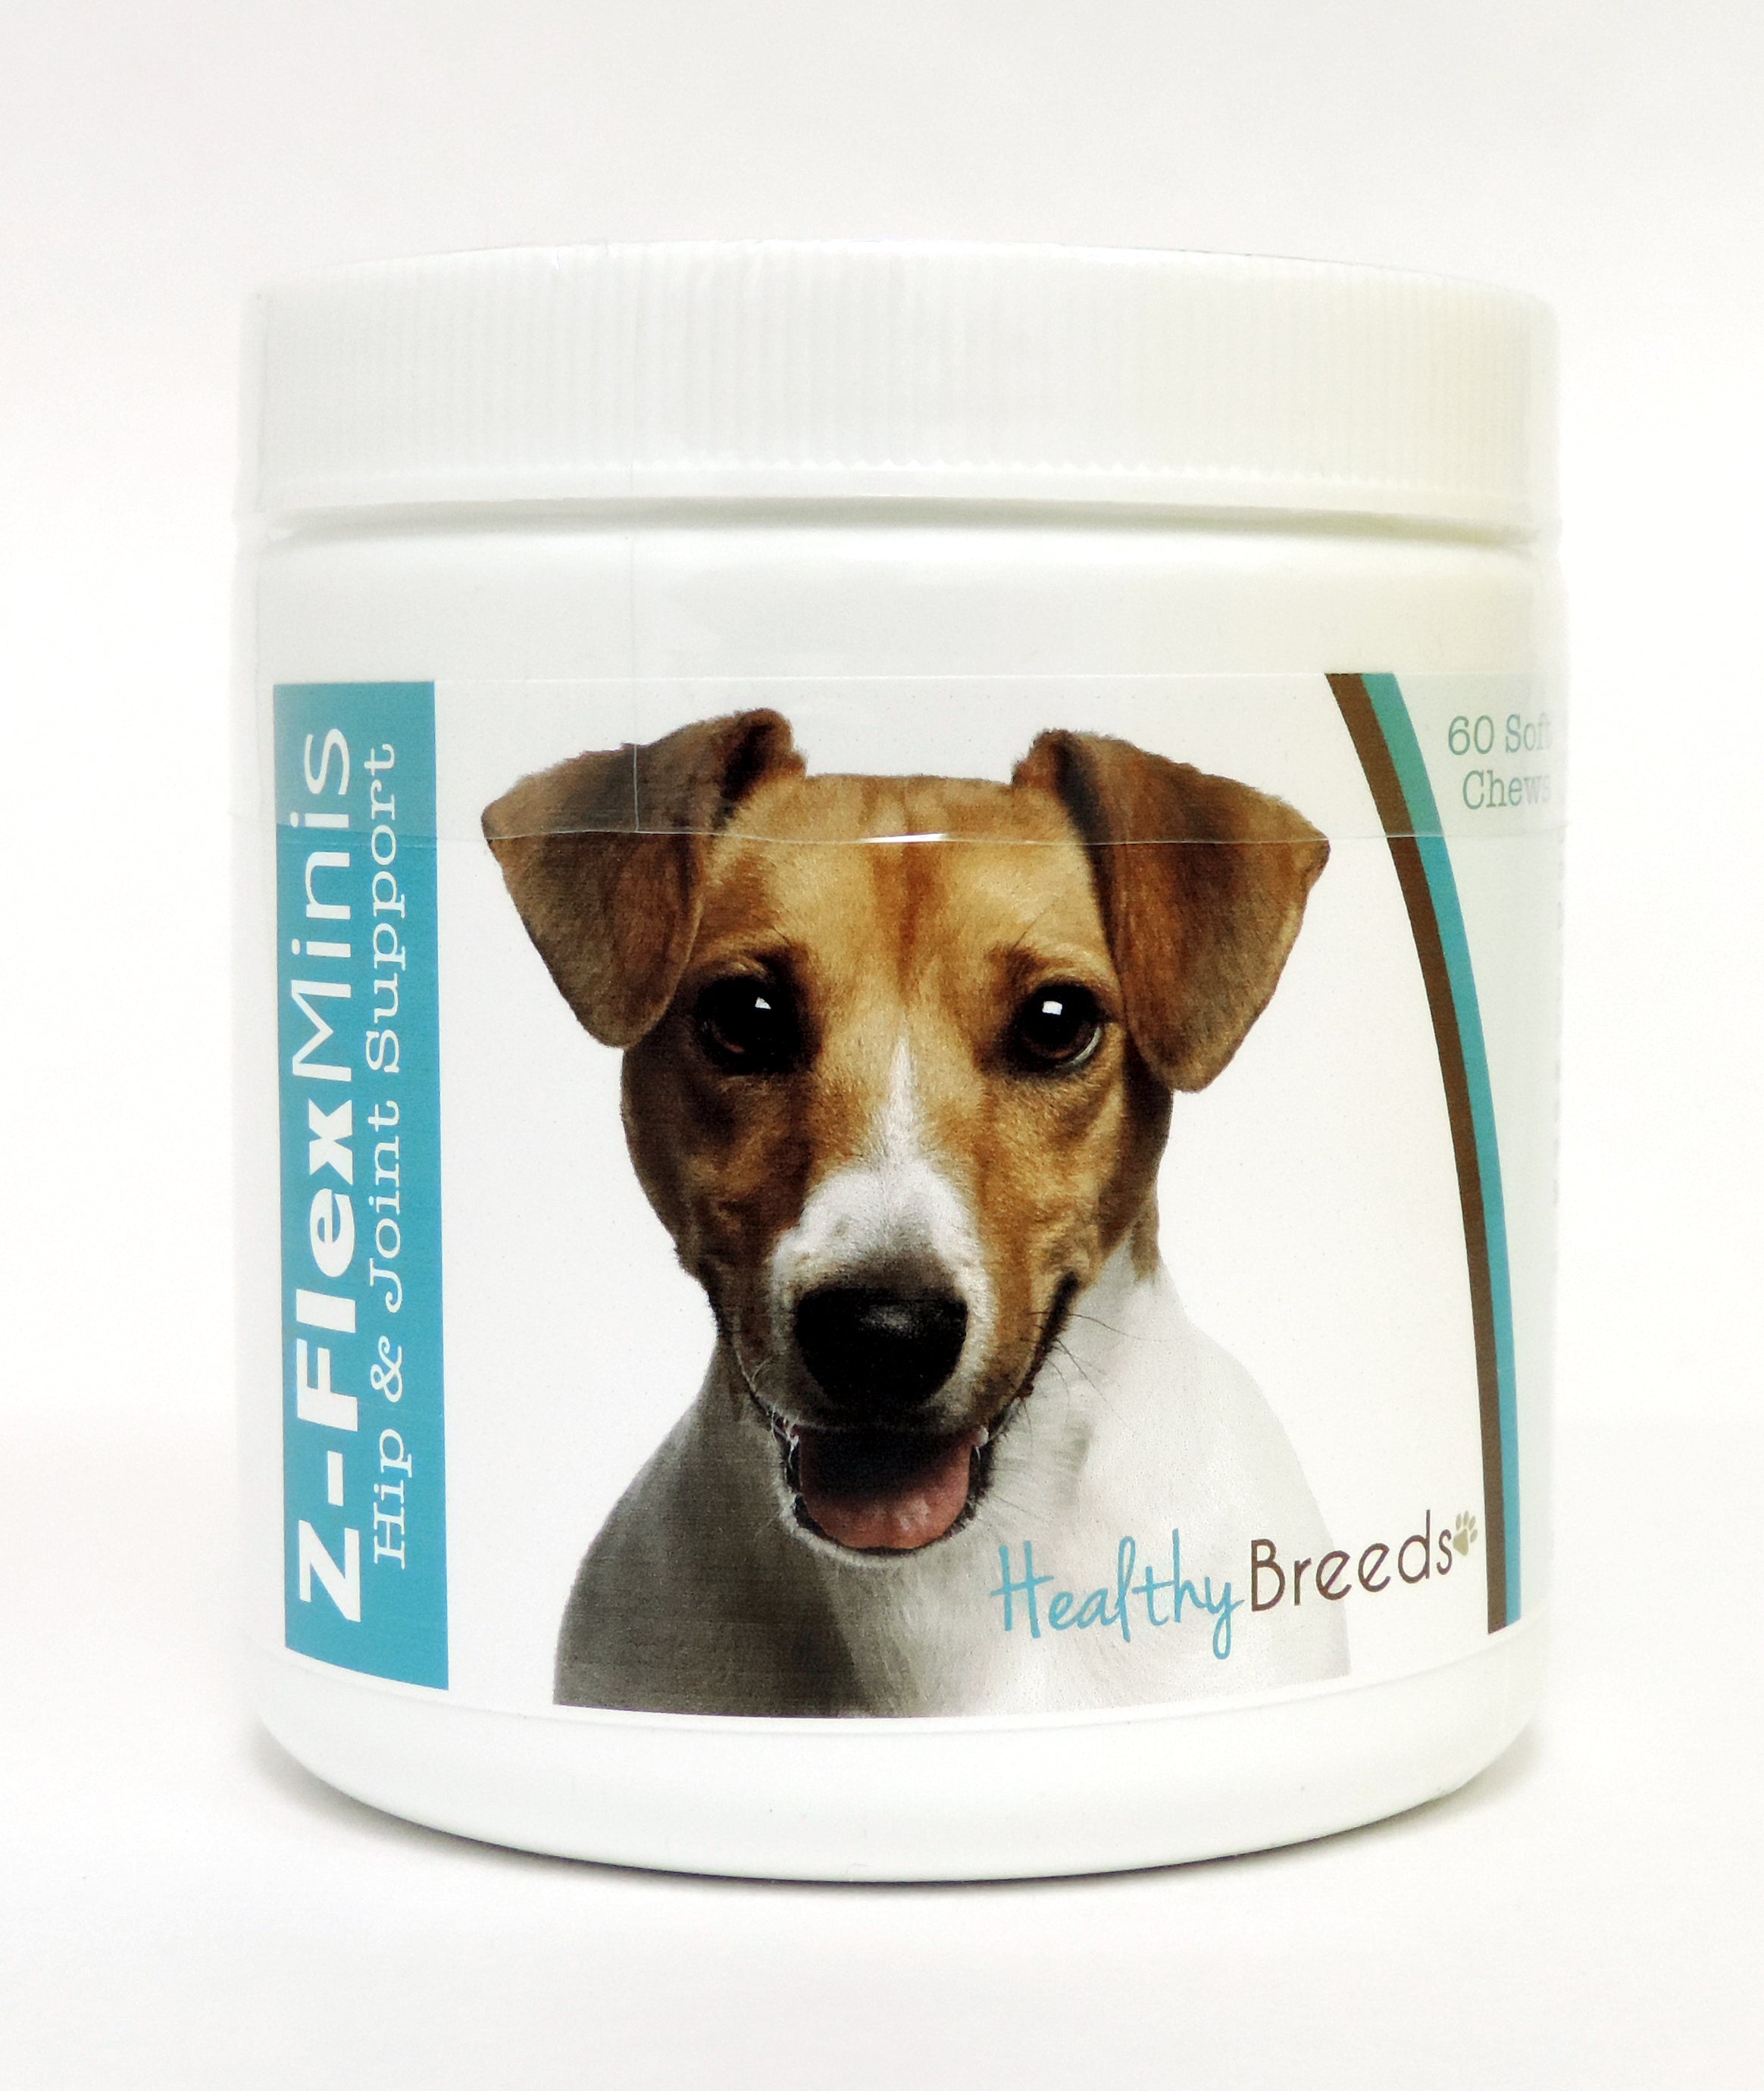 Jack Russell Terrier Z-Flex Minis Hip and Joint Support Soft Chews 60 Count